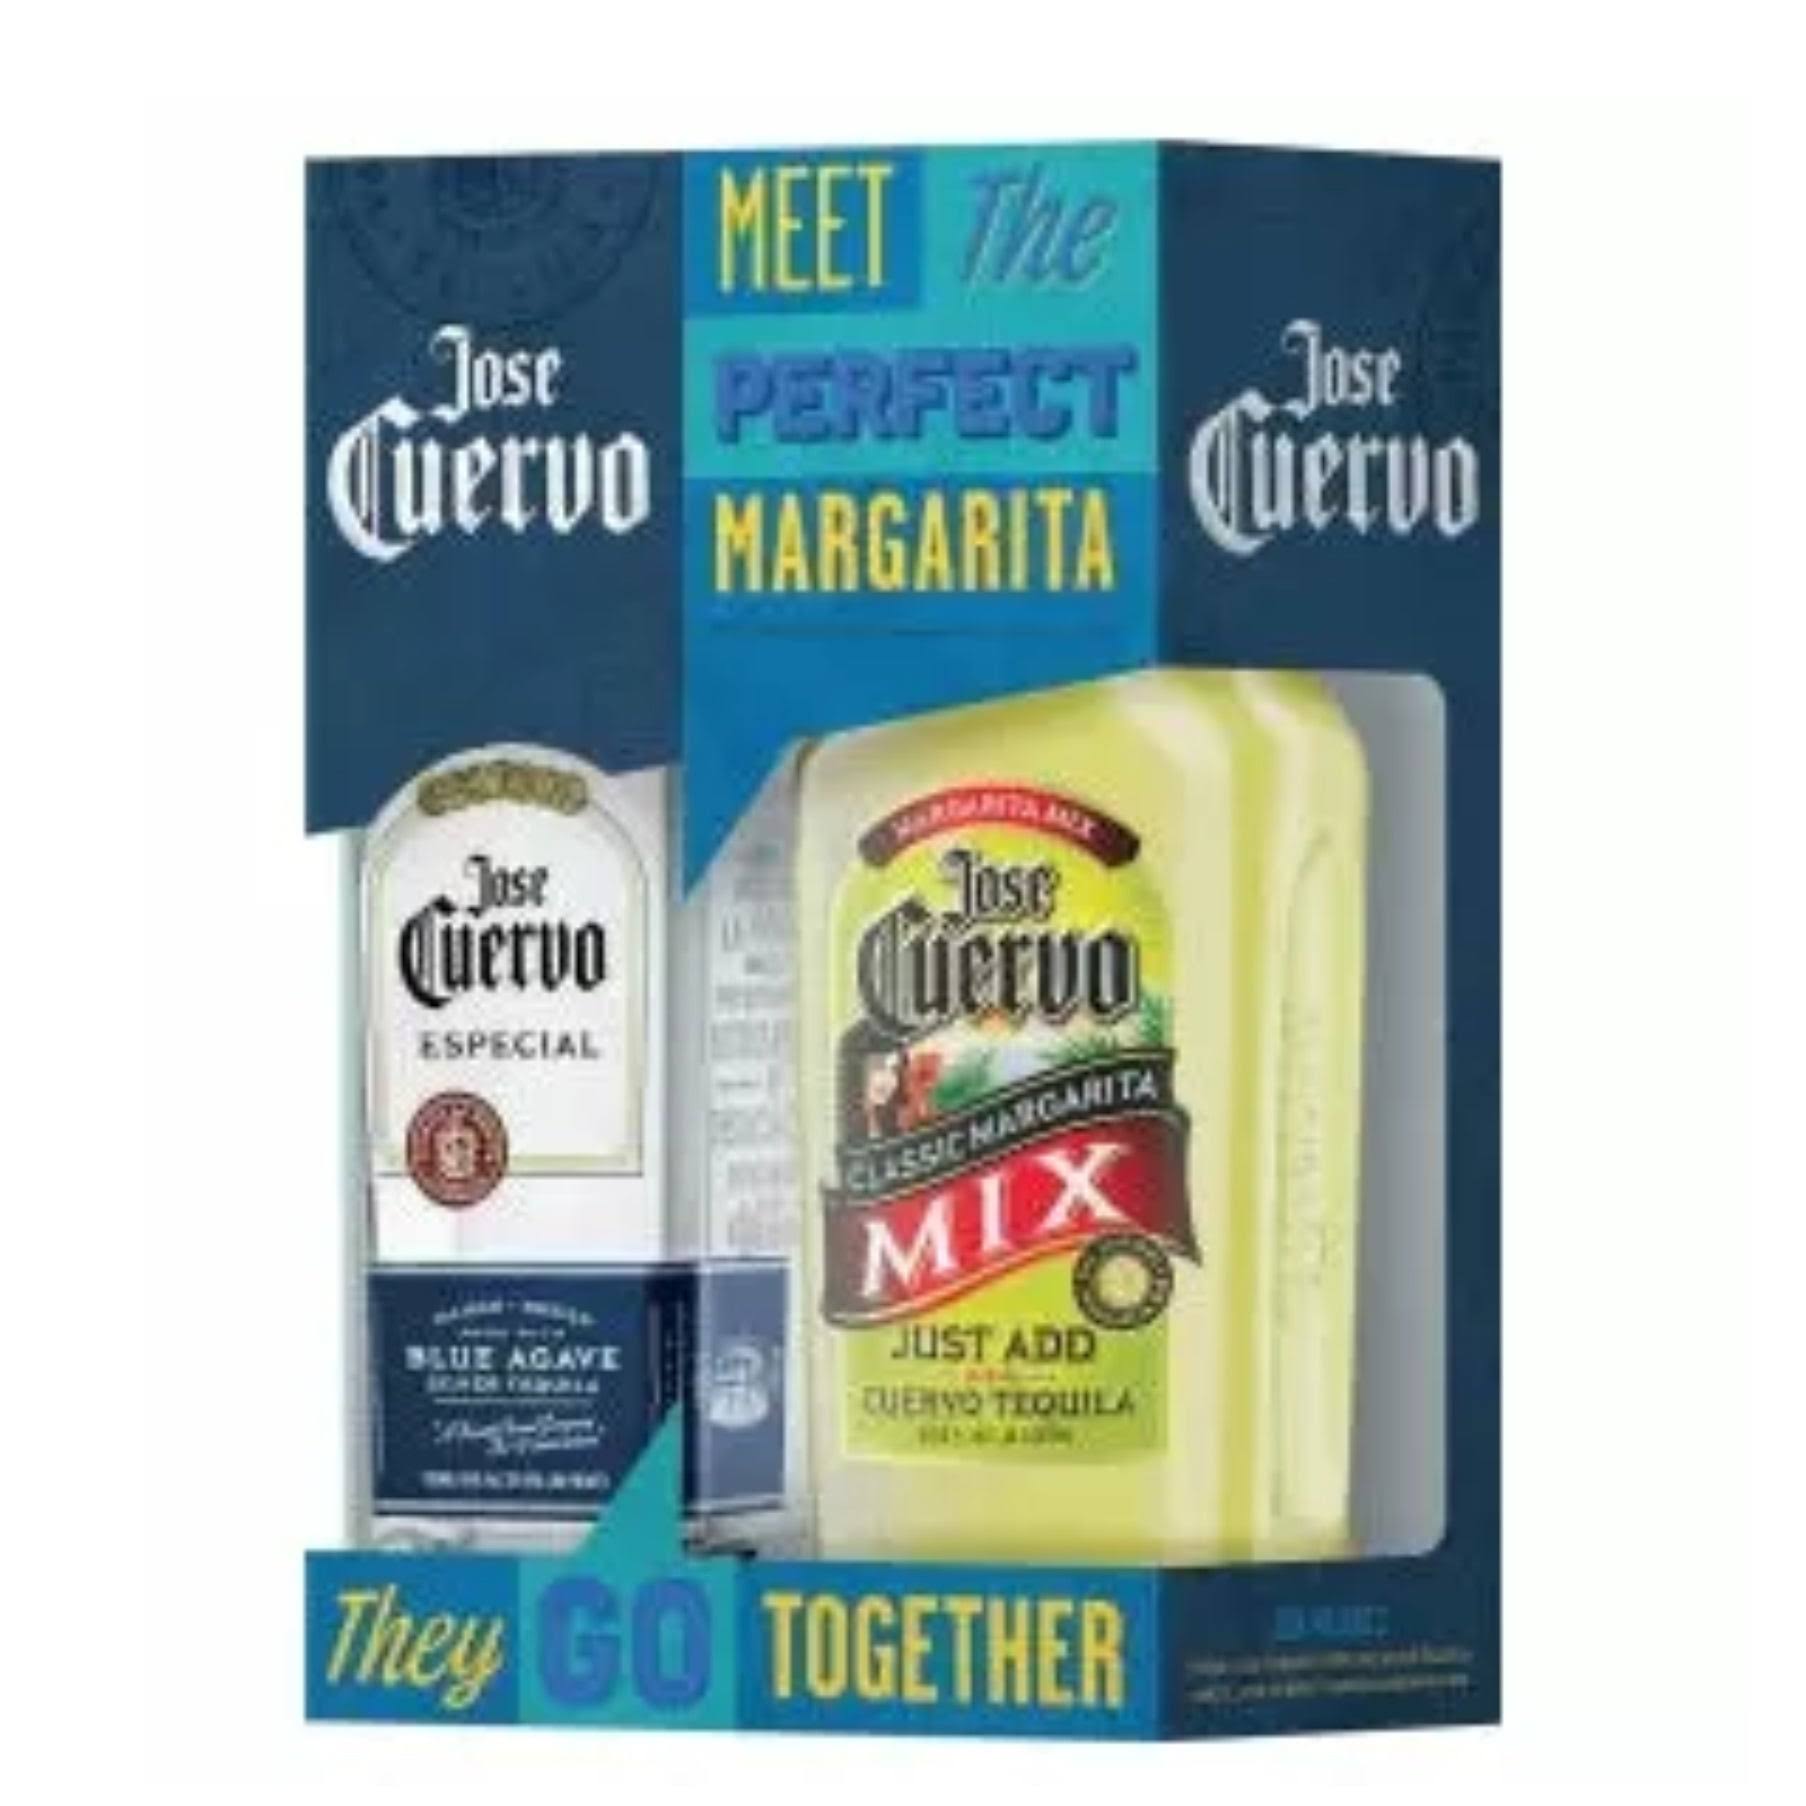 Jose Cuervo Silver Tequila with Mix